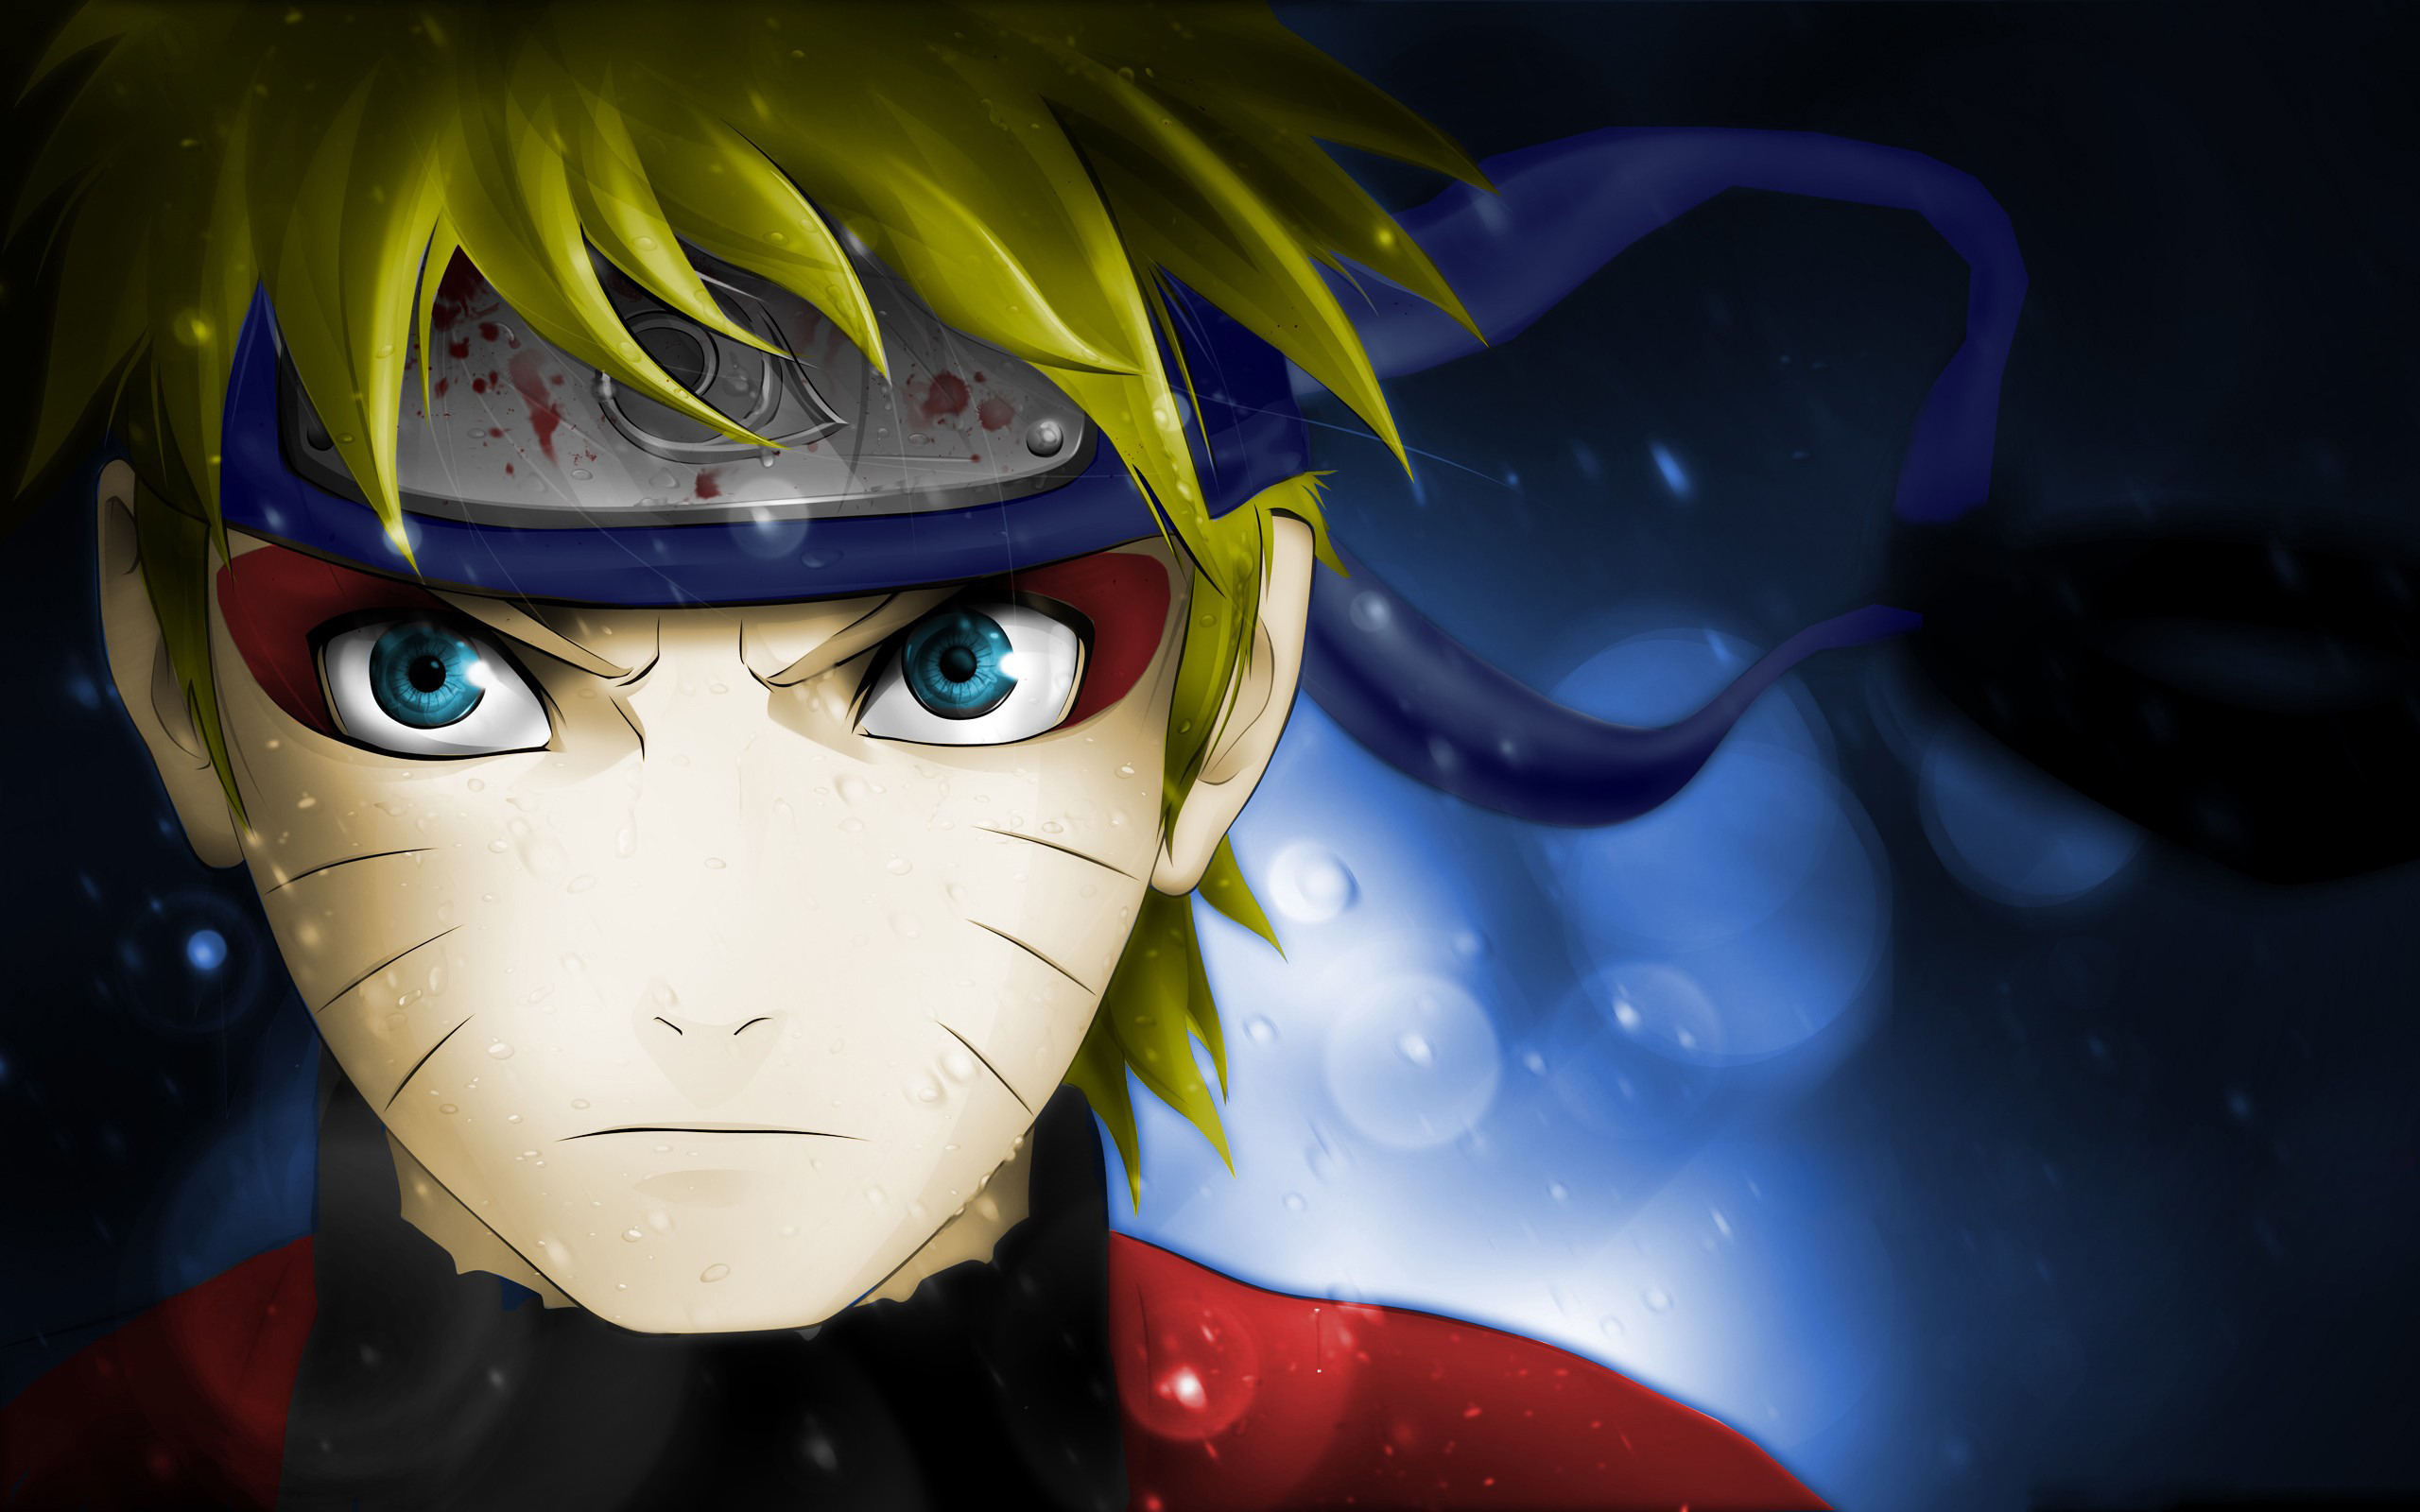 Top 11 Naruto Wallpapers for PC and Desktop